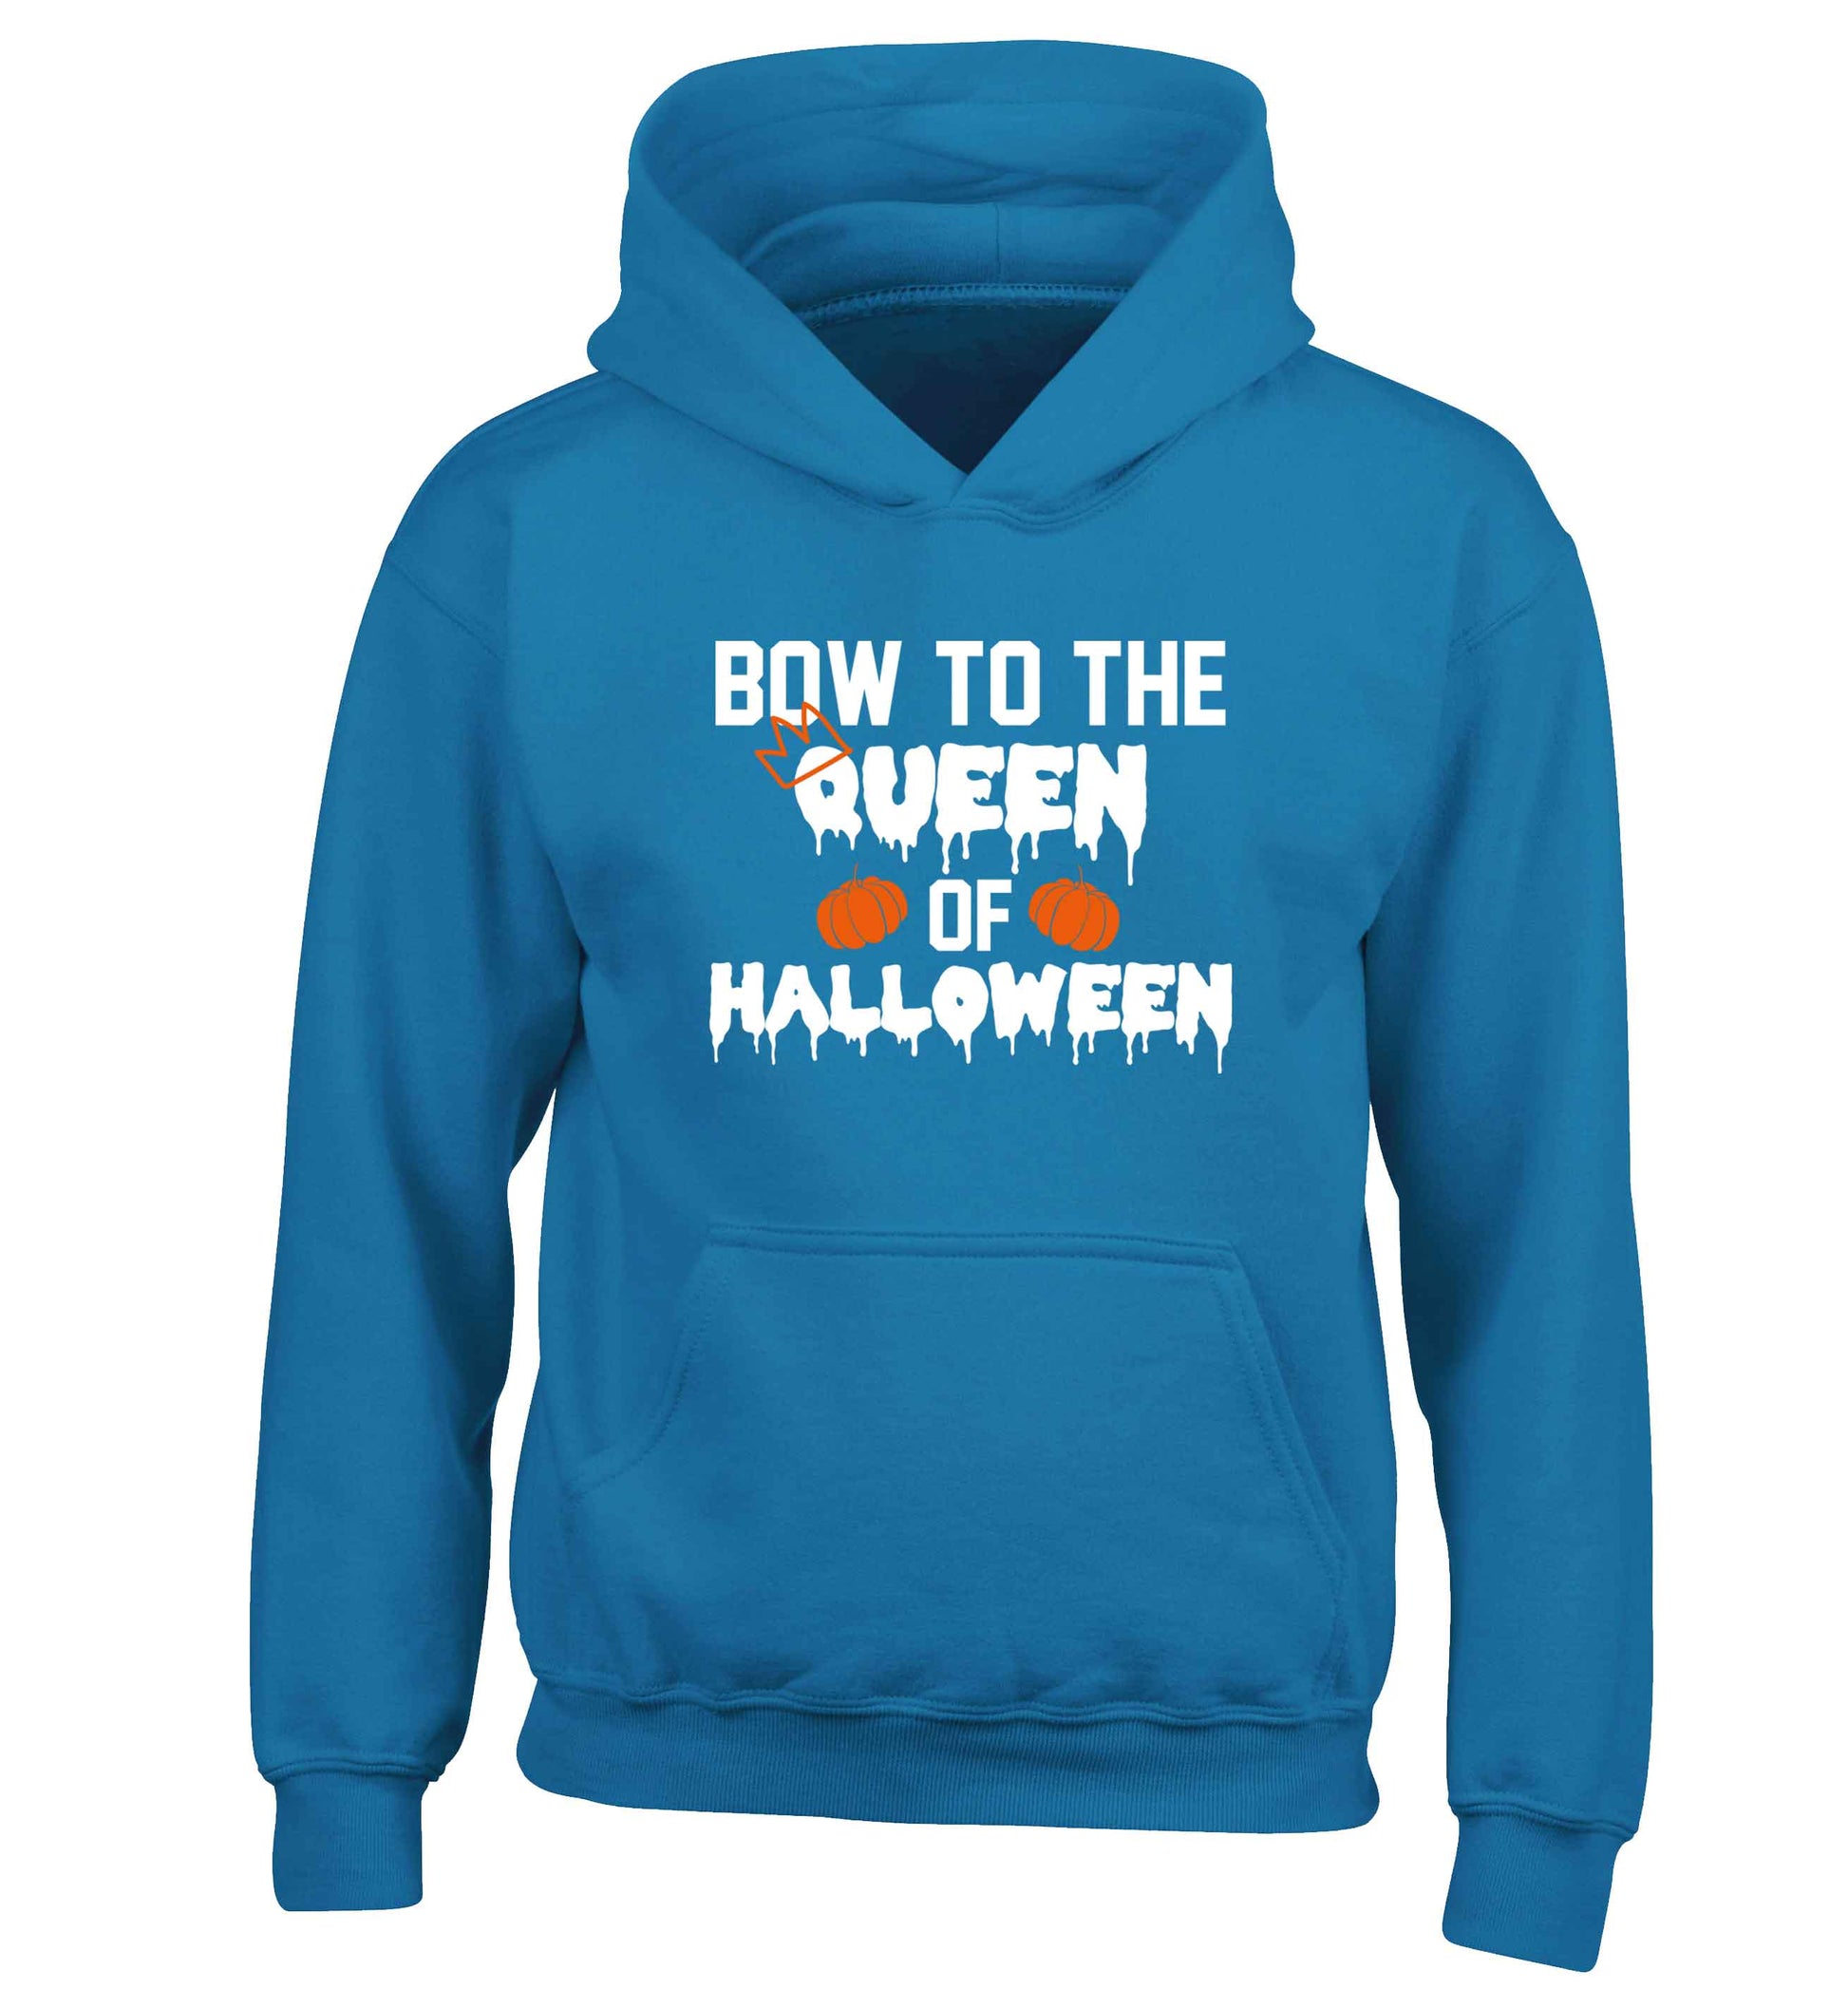 Bow to the Queen of halloween children's blue hoodie 12-13 Years